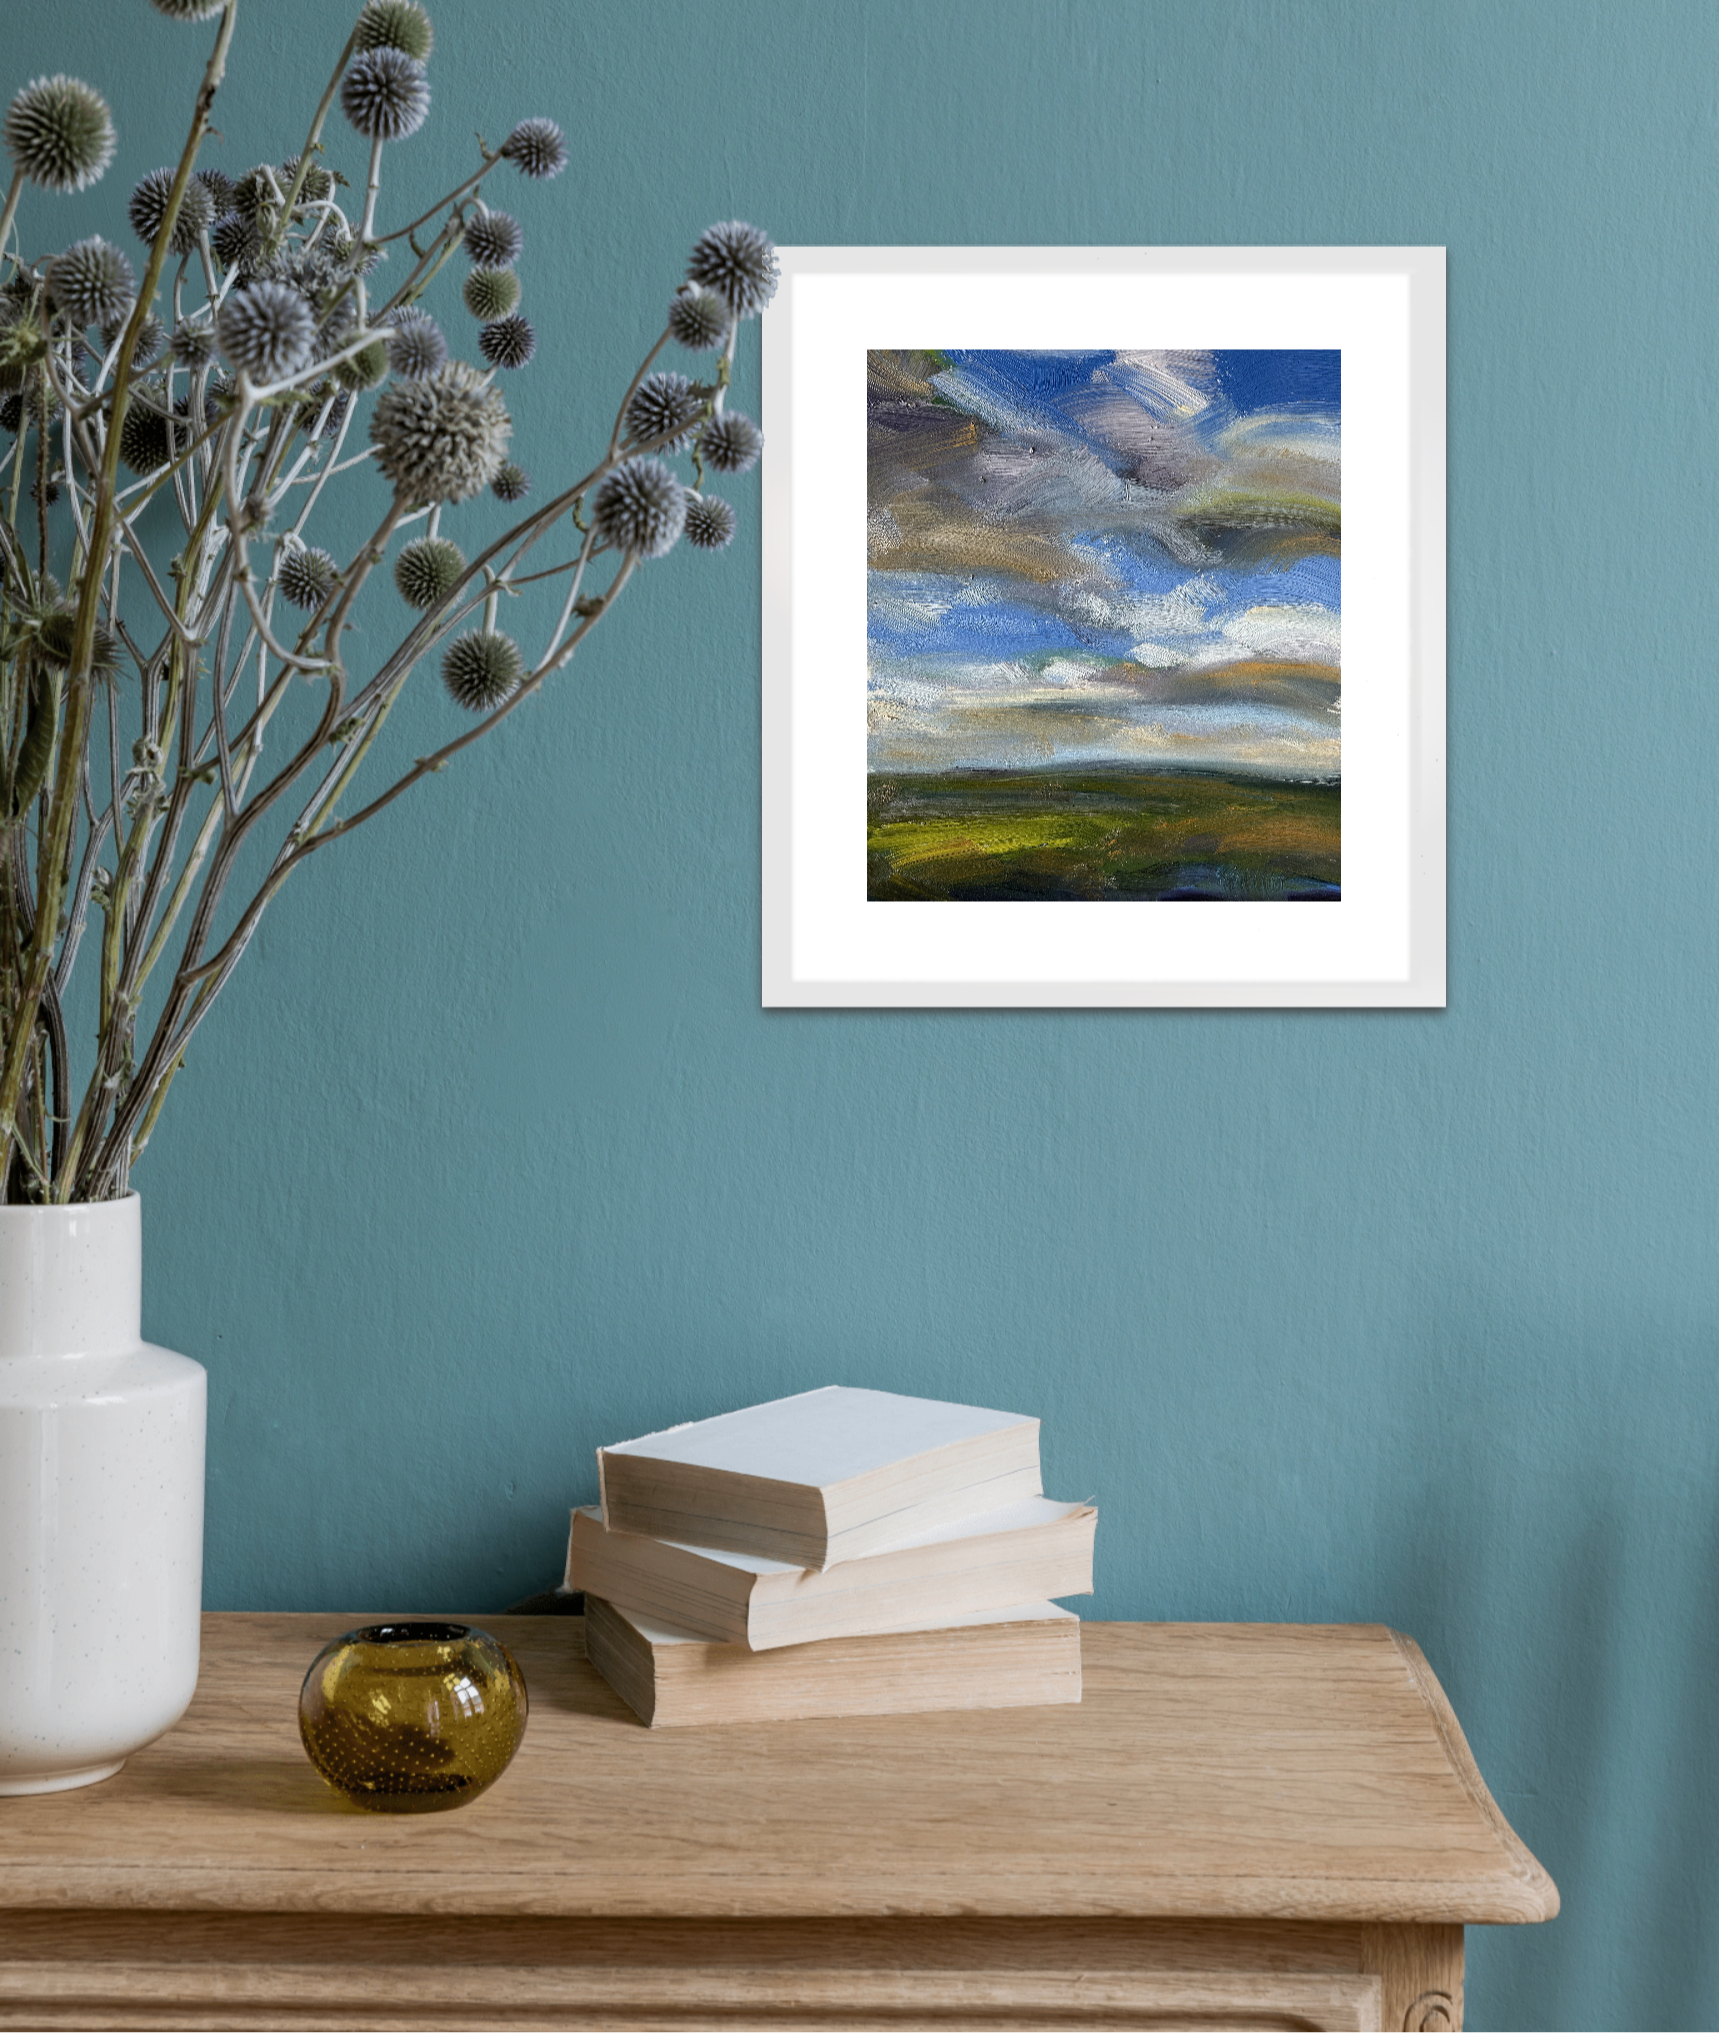 Breathe Deeply Original Oil On Paper Landscape Painting In Room Setting 3